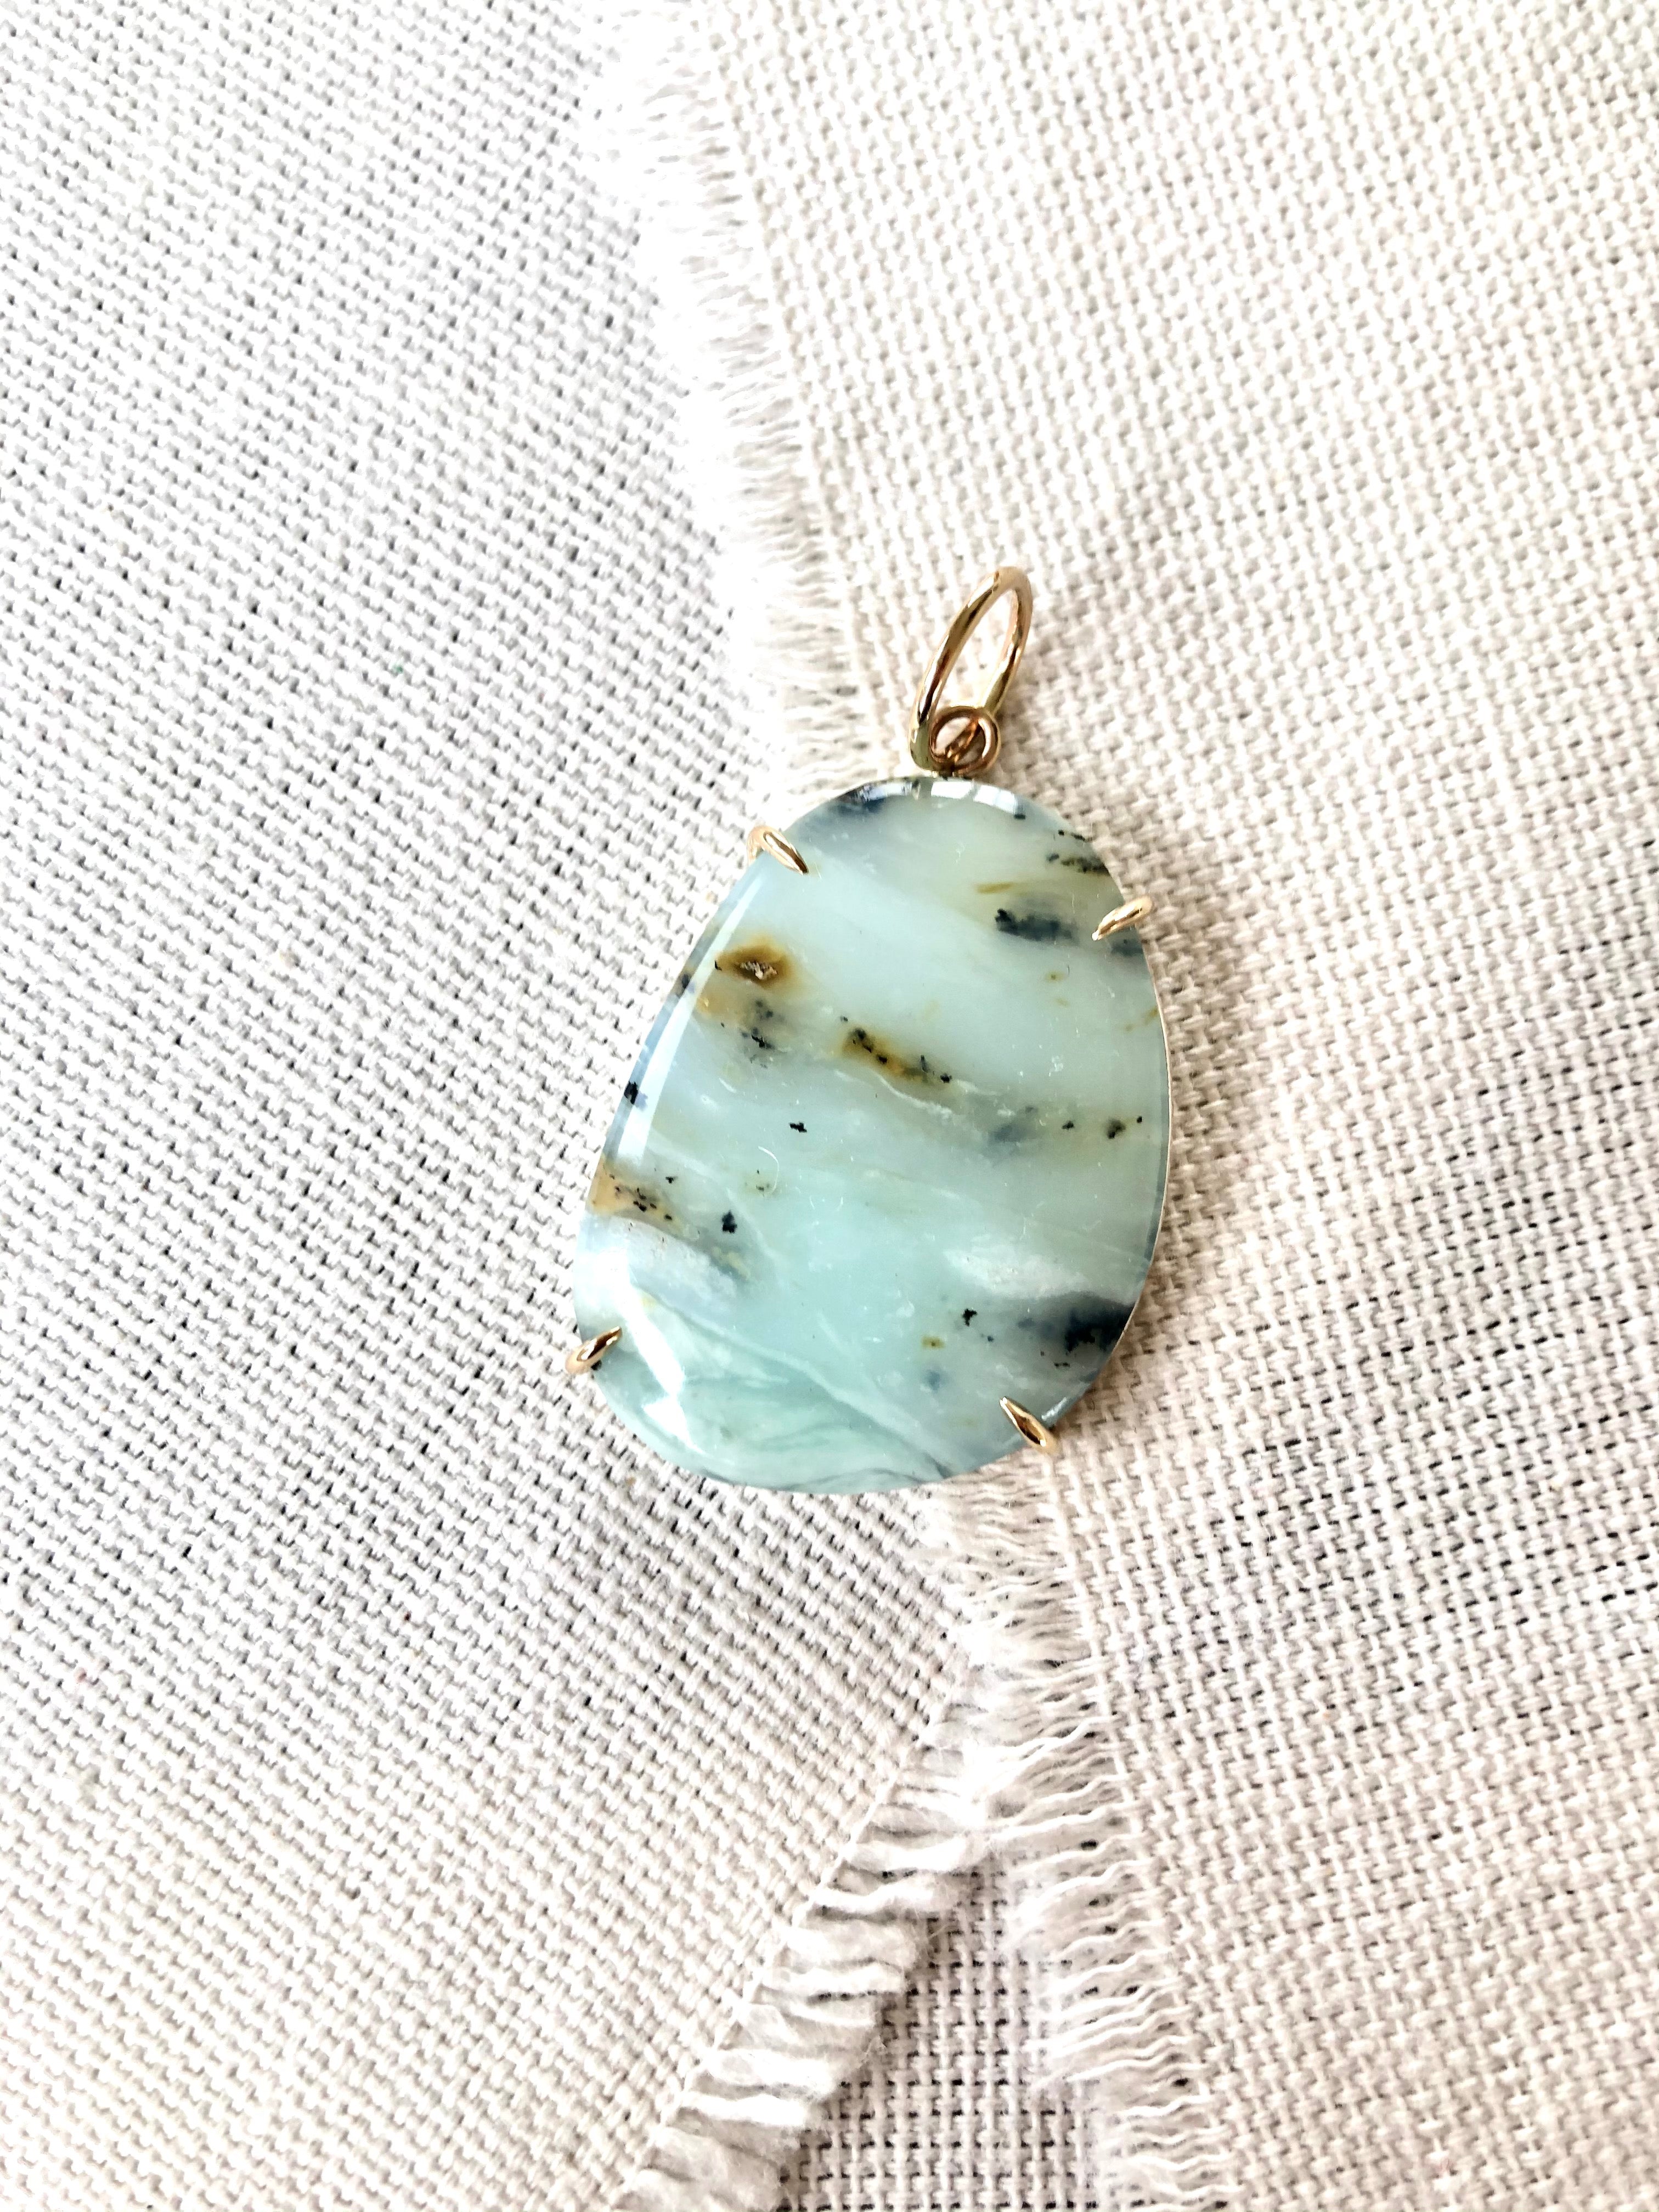 Peruvian blue opal jewelry has such a soft and beautiful blue color.  This beautiful blue opal pendant reminds me of the ocean.